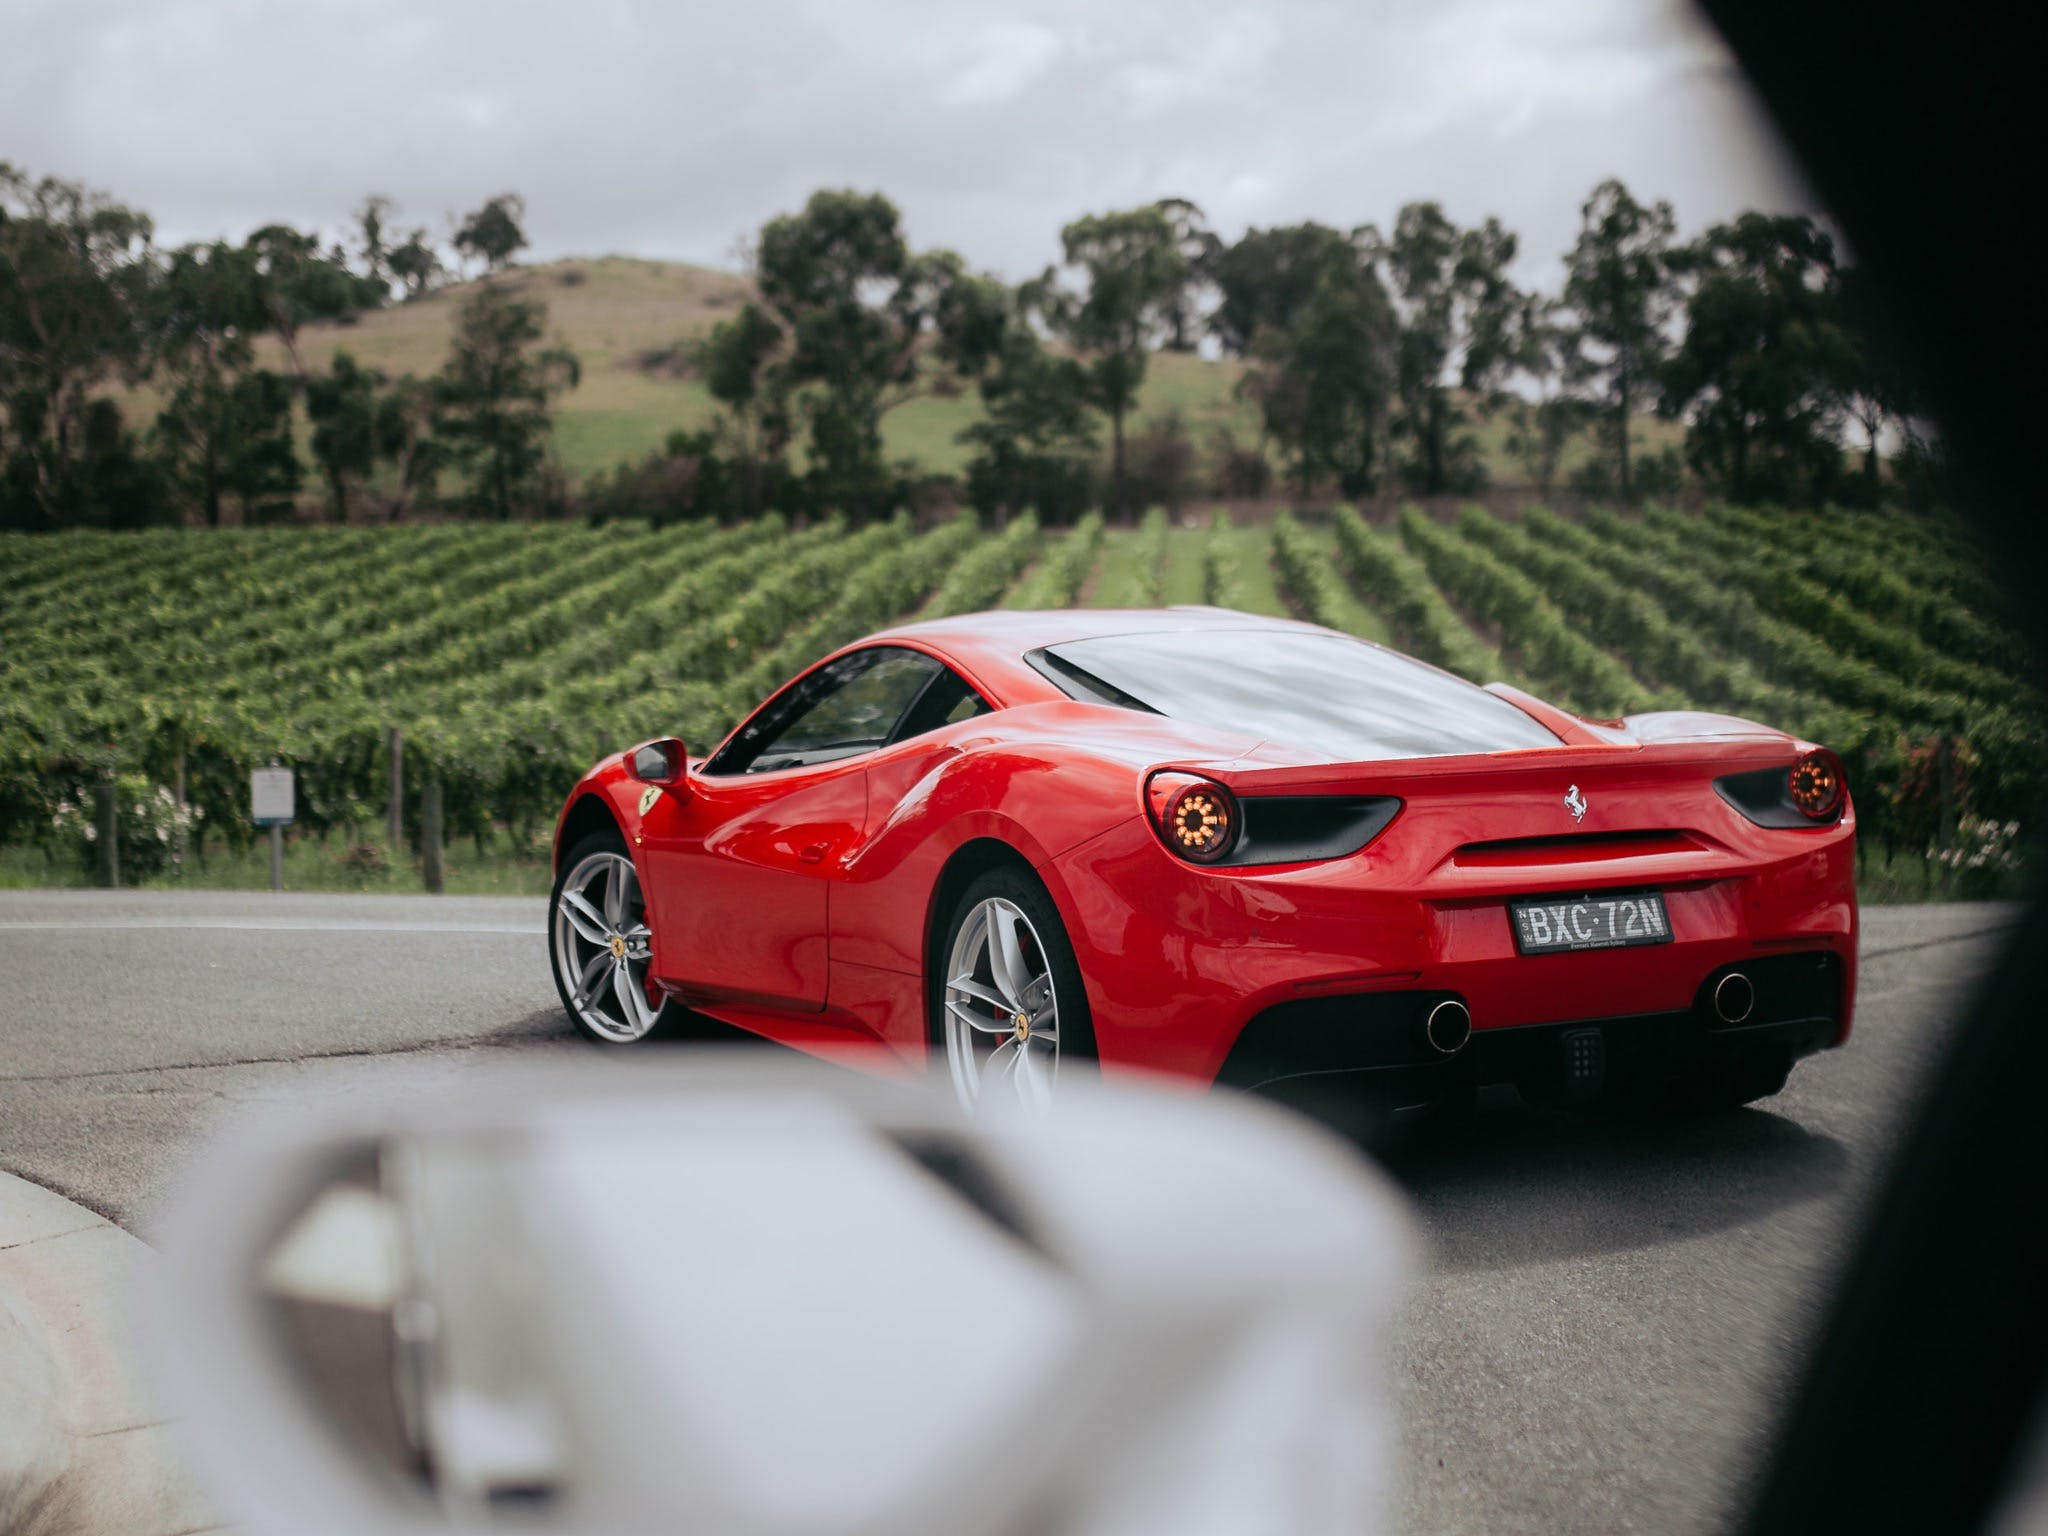 The Prancing Horse Supercar Drive Day Experience - Melbourne Yarra Valley - Accommodation Guide